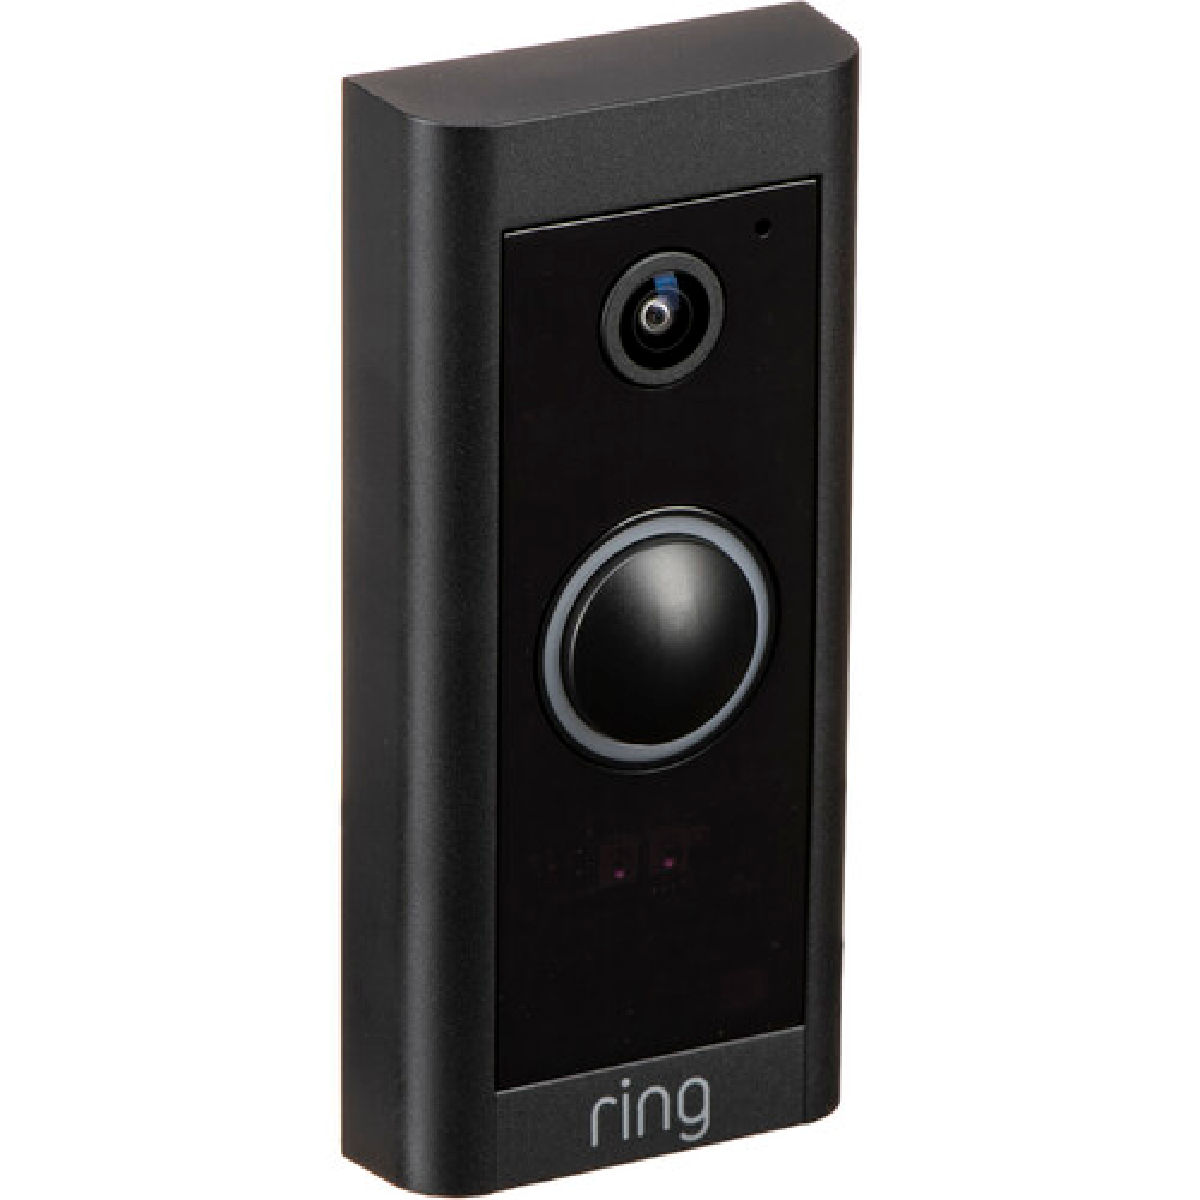 Ring 1080p Wired Video Doorbell B08CKHPP52